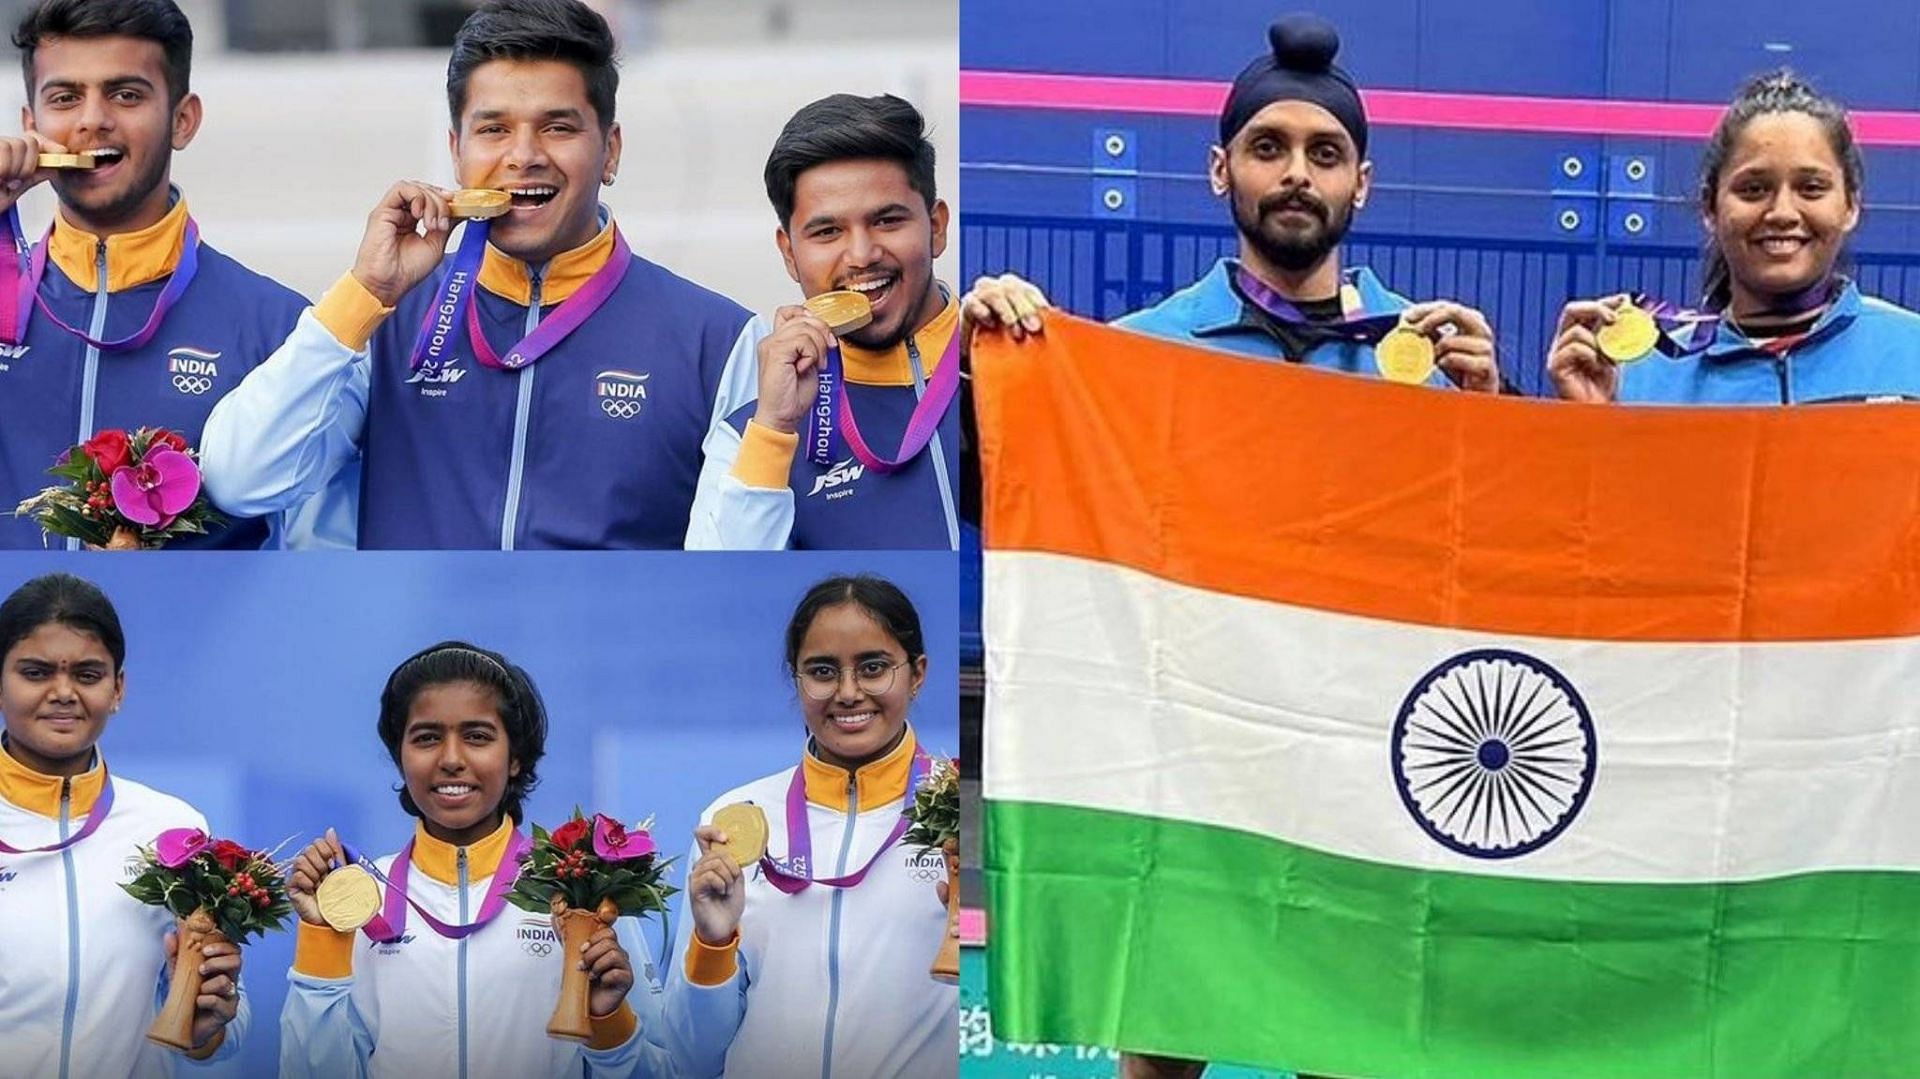 India won 5 medals, including 3 gold medals today (Image: Instagram)